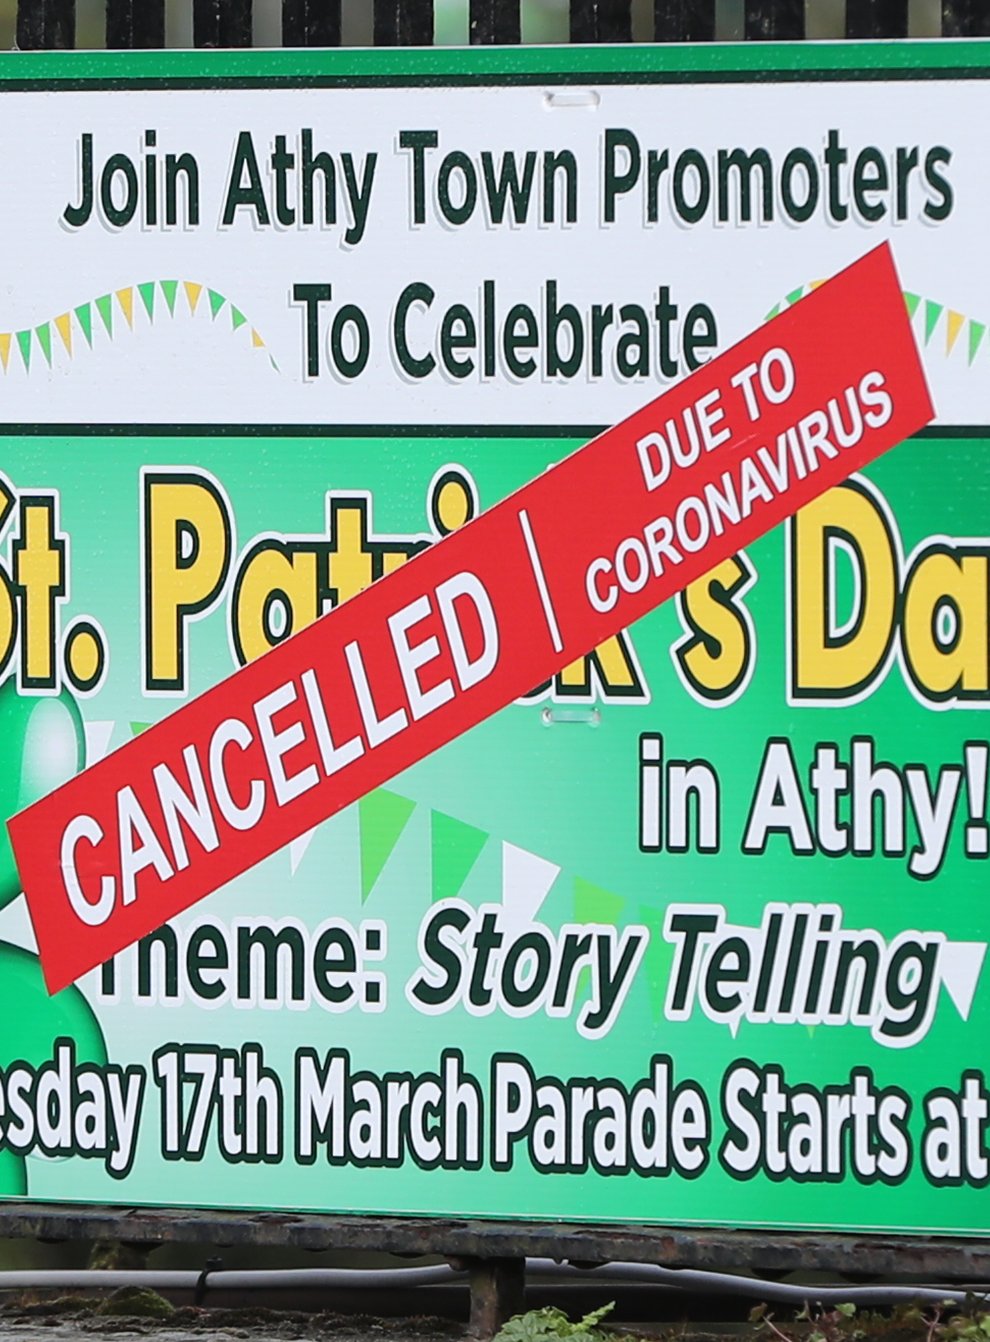 St Patrick's Day celebrations have been cancelled across the globe (PA Images)